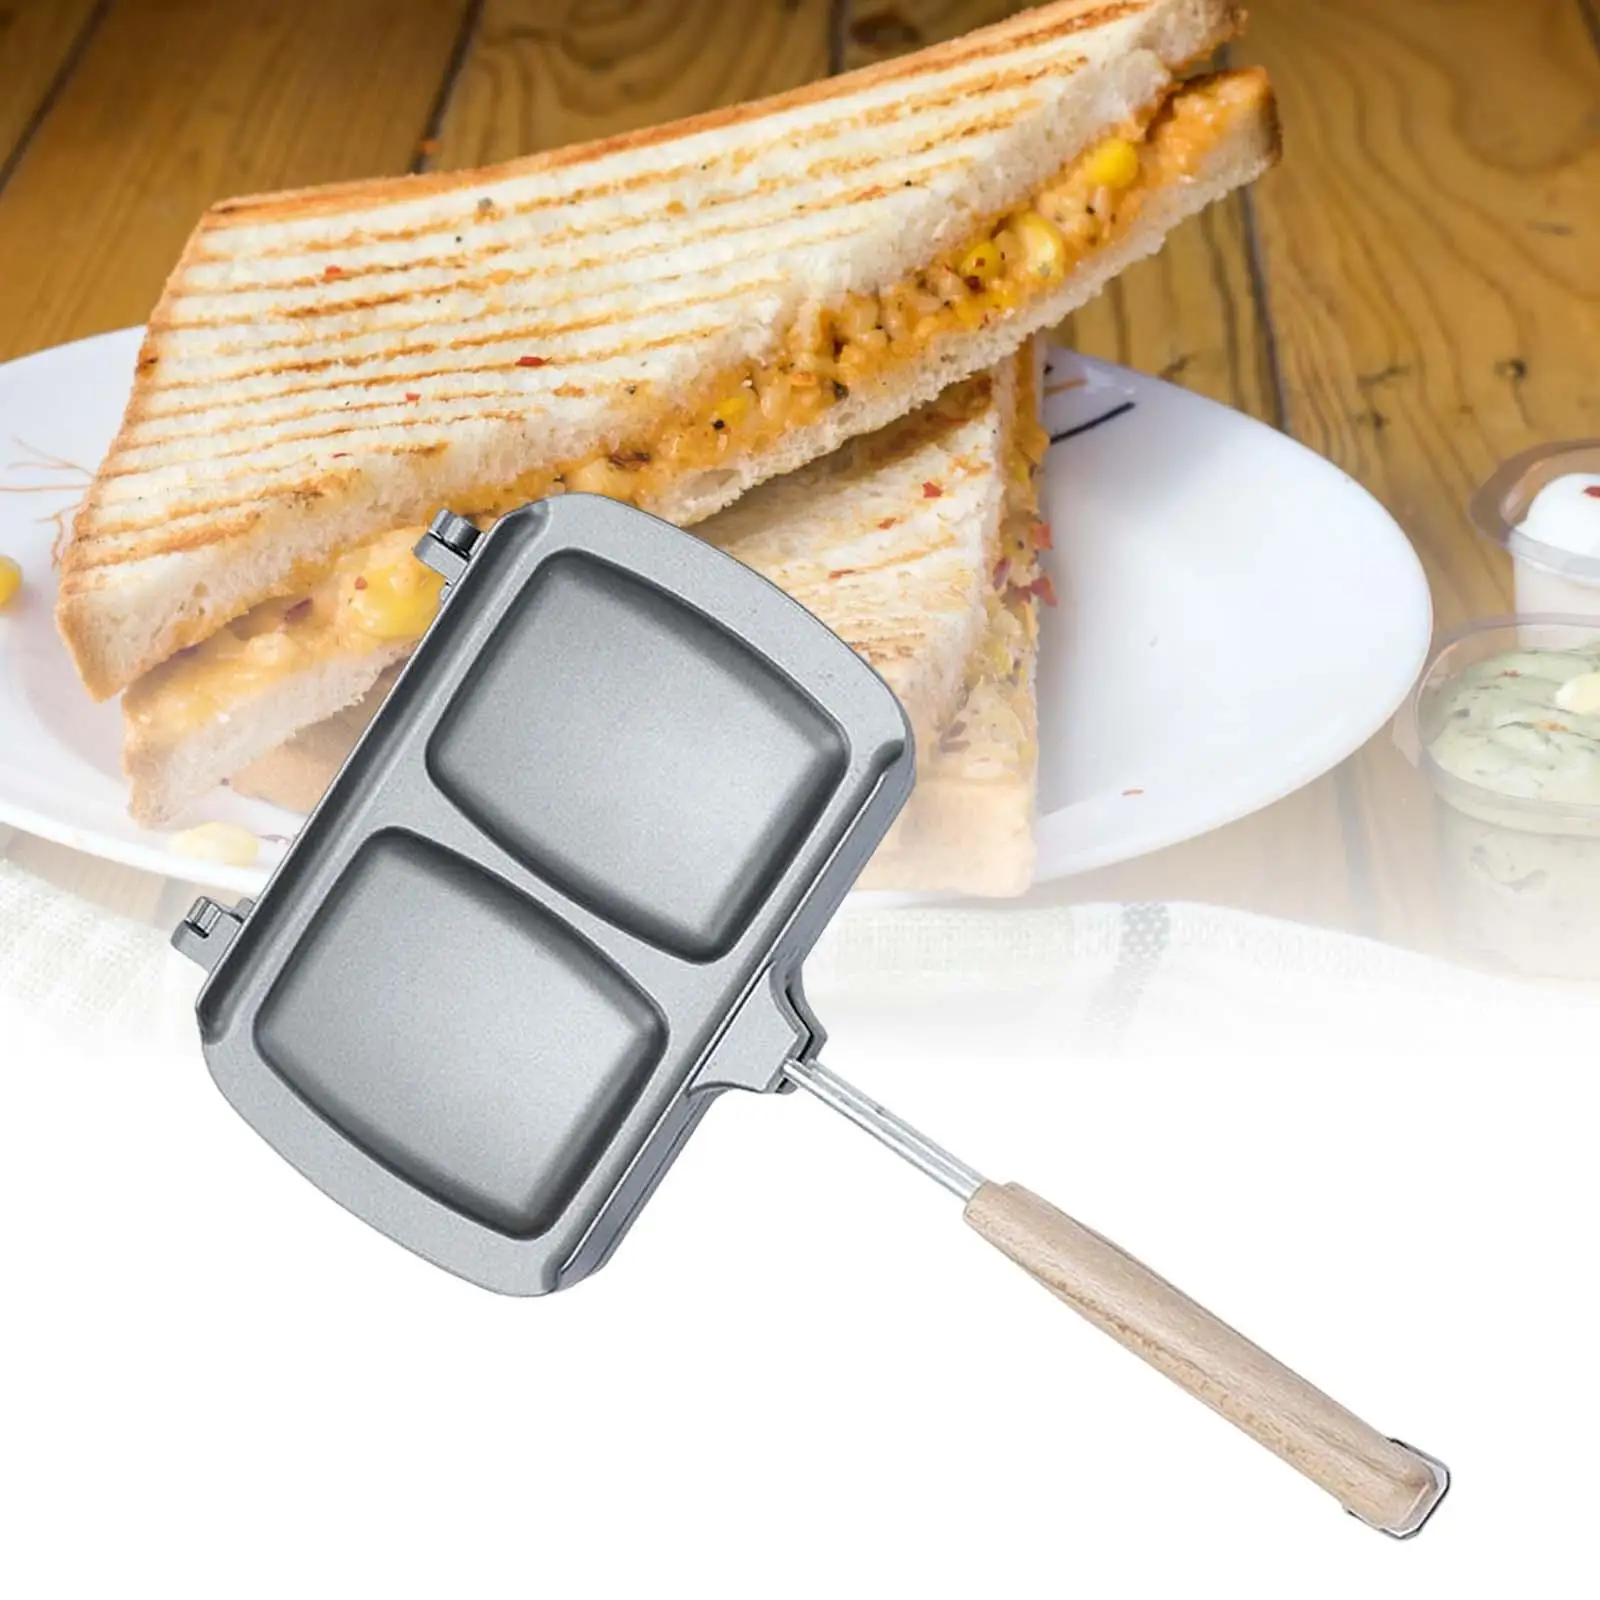 the product can be customized frying pan nonstick pan household frying pan induction cooker gas stove universal Bread Toast Maker Non Stick Grill Pan Double Sided Heating Frying Egg Ham Sandwiches Maker for Induction Cooker Stove Top